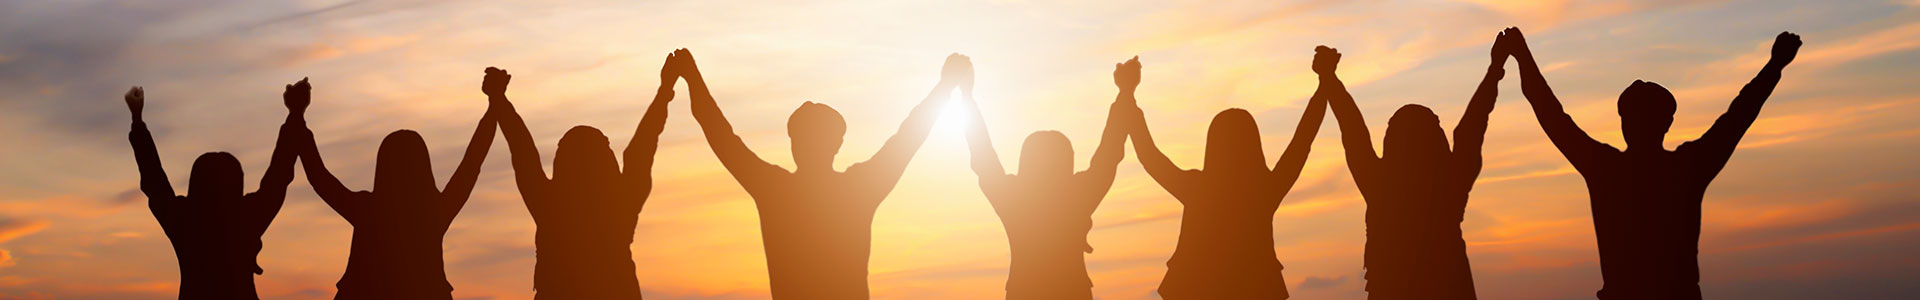 Stock image of people with joined hands overhead, silhouetted by a sunset.